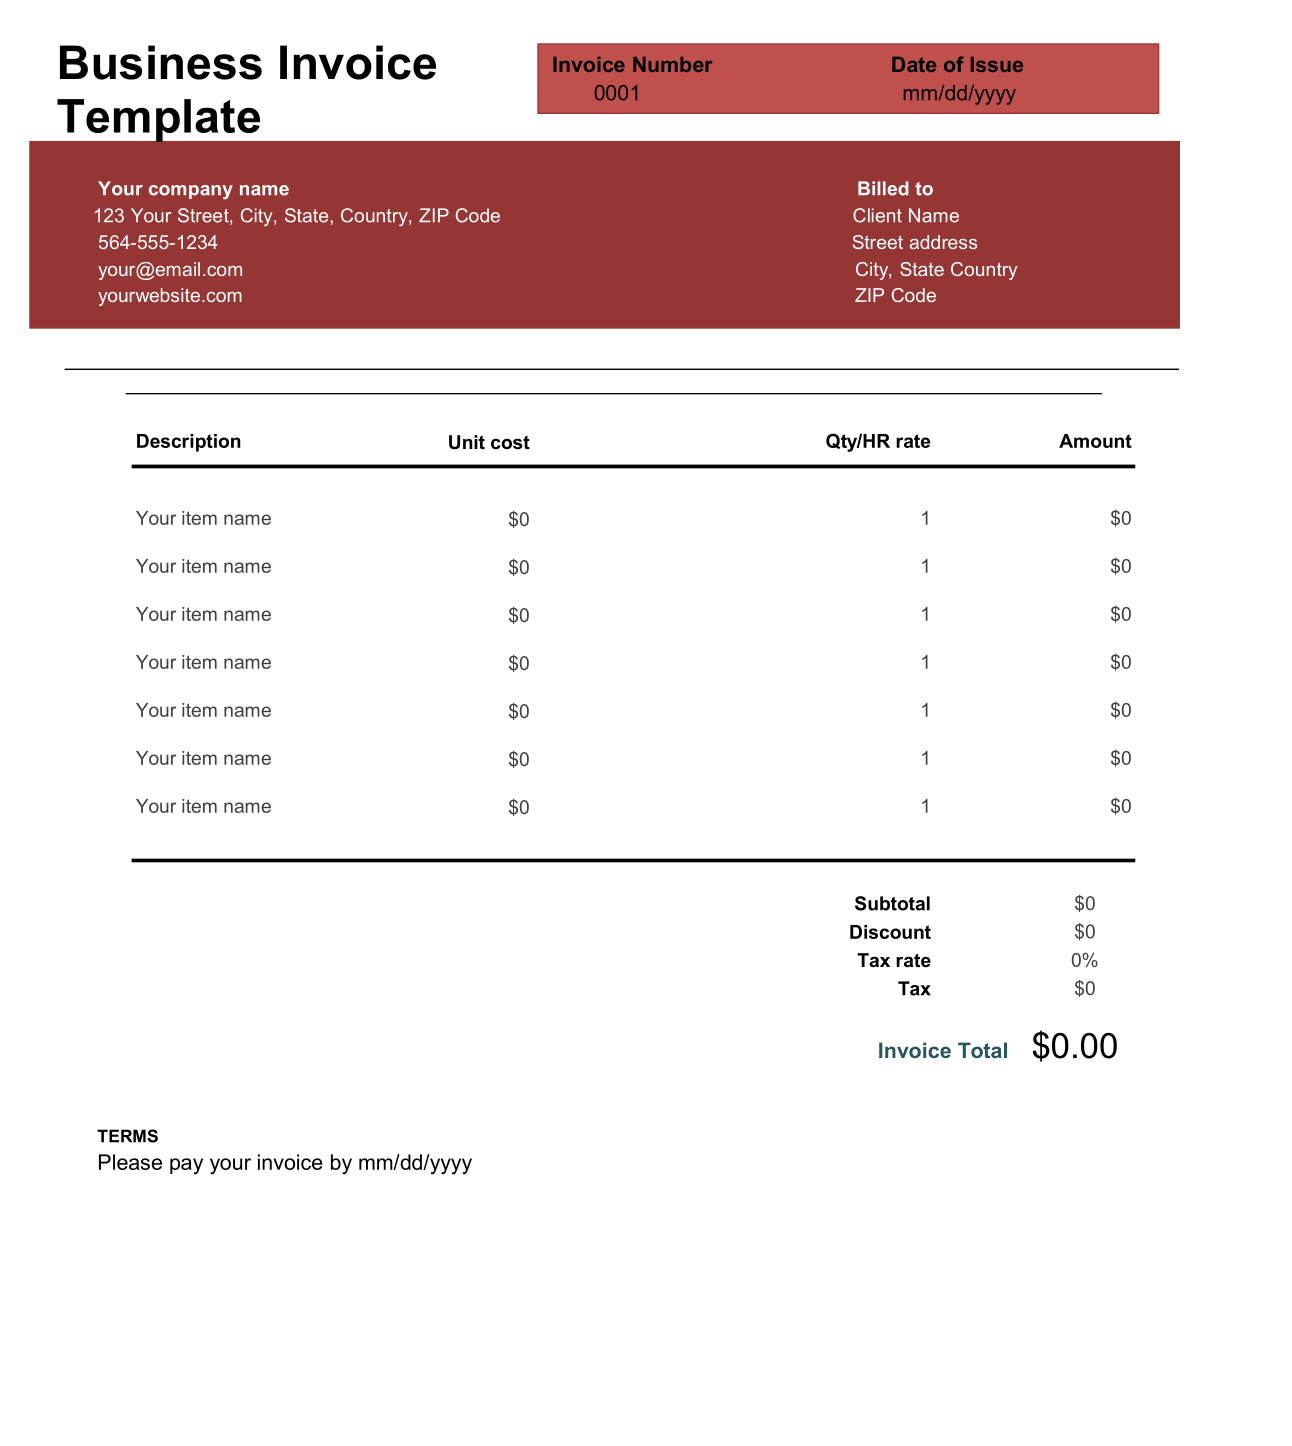 Business Invoice Template in Excel